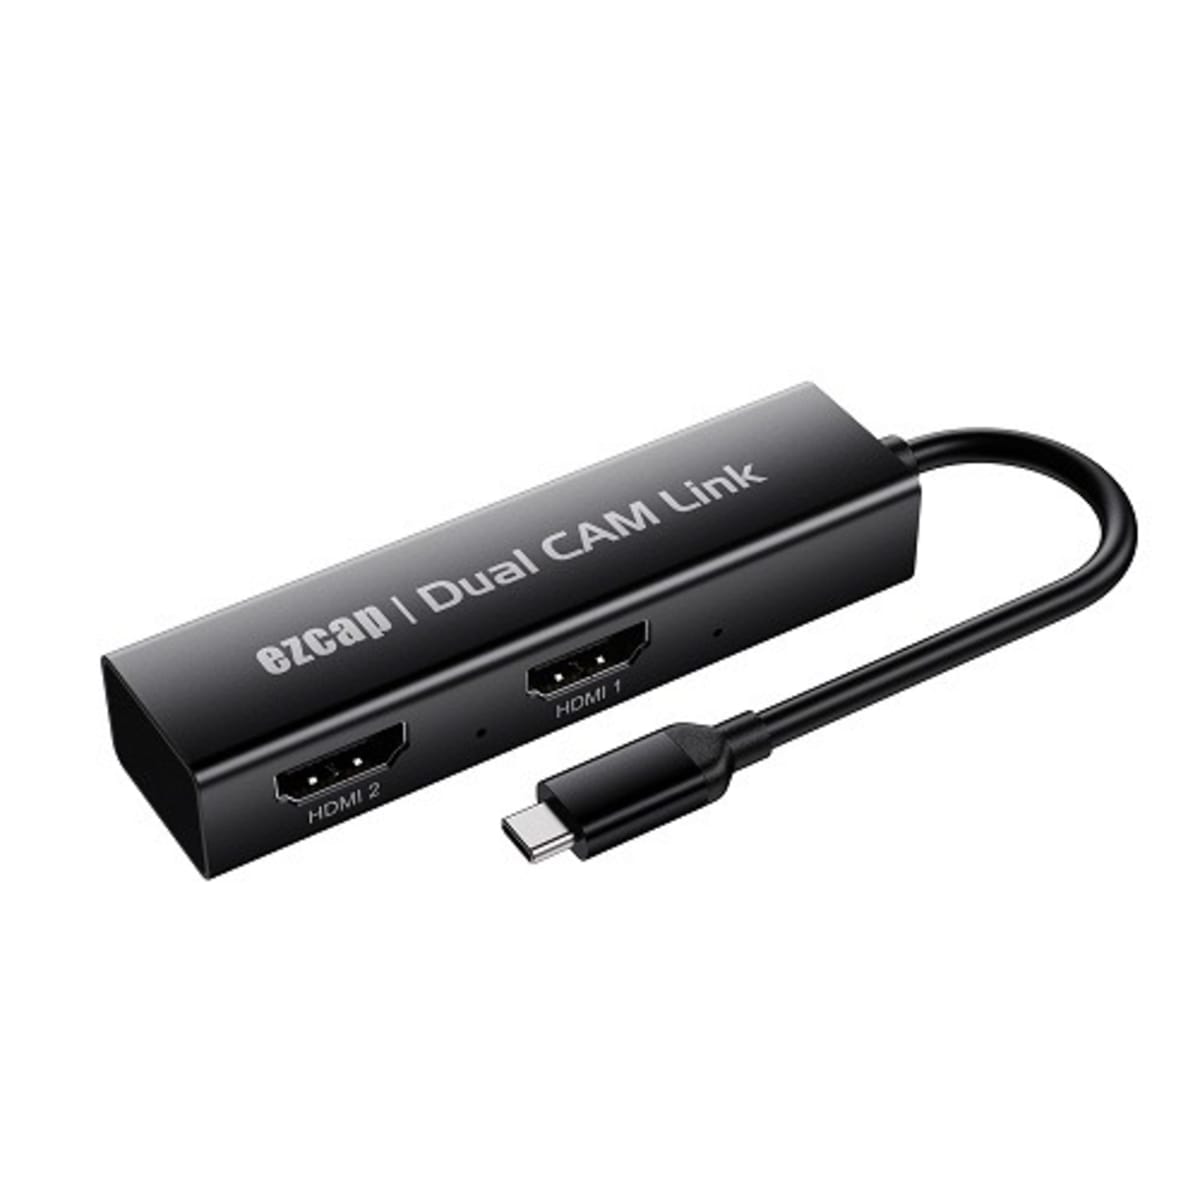 EZcap Multi-channel Video And Audio Capture Card From Two Video Sources 2  HDMI To USB-C -2in1